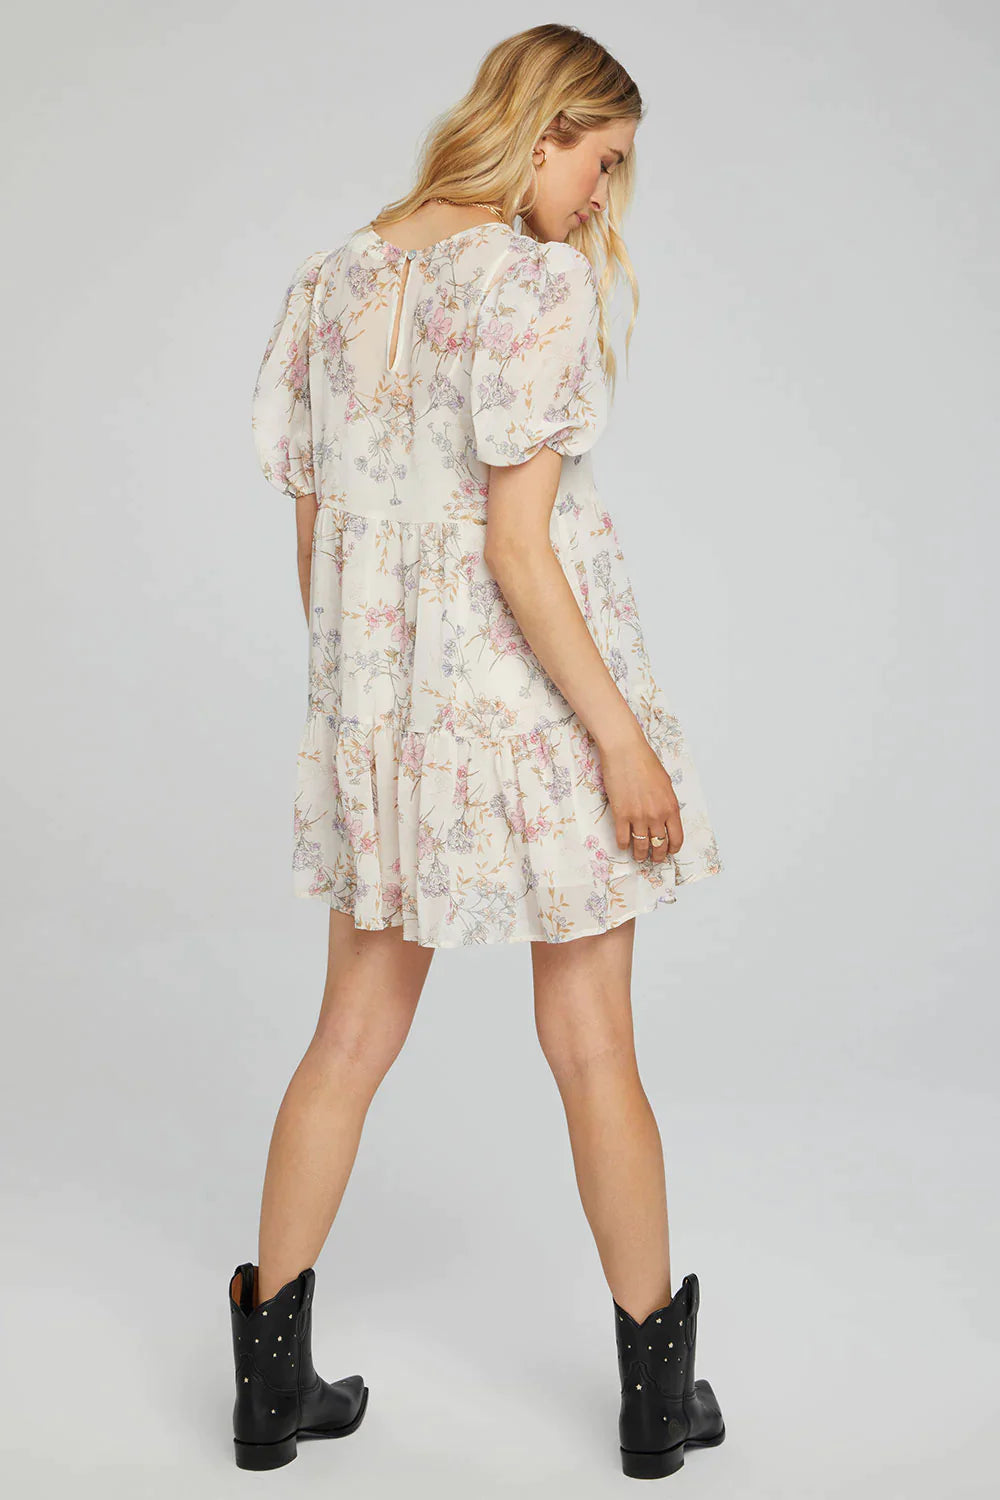 The Kimber Mini Dress by Saltwater Luxe